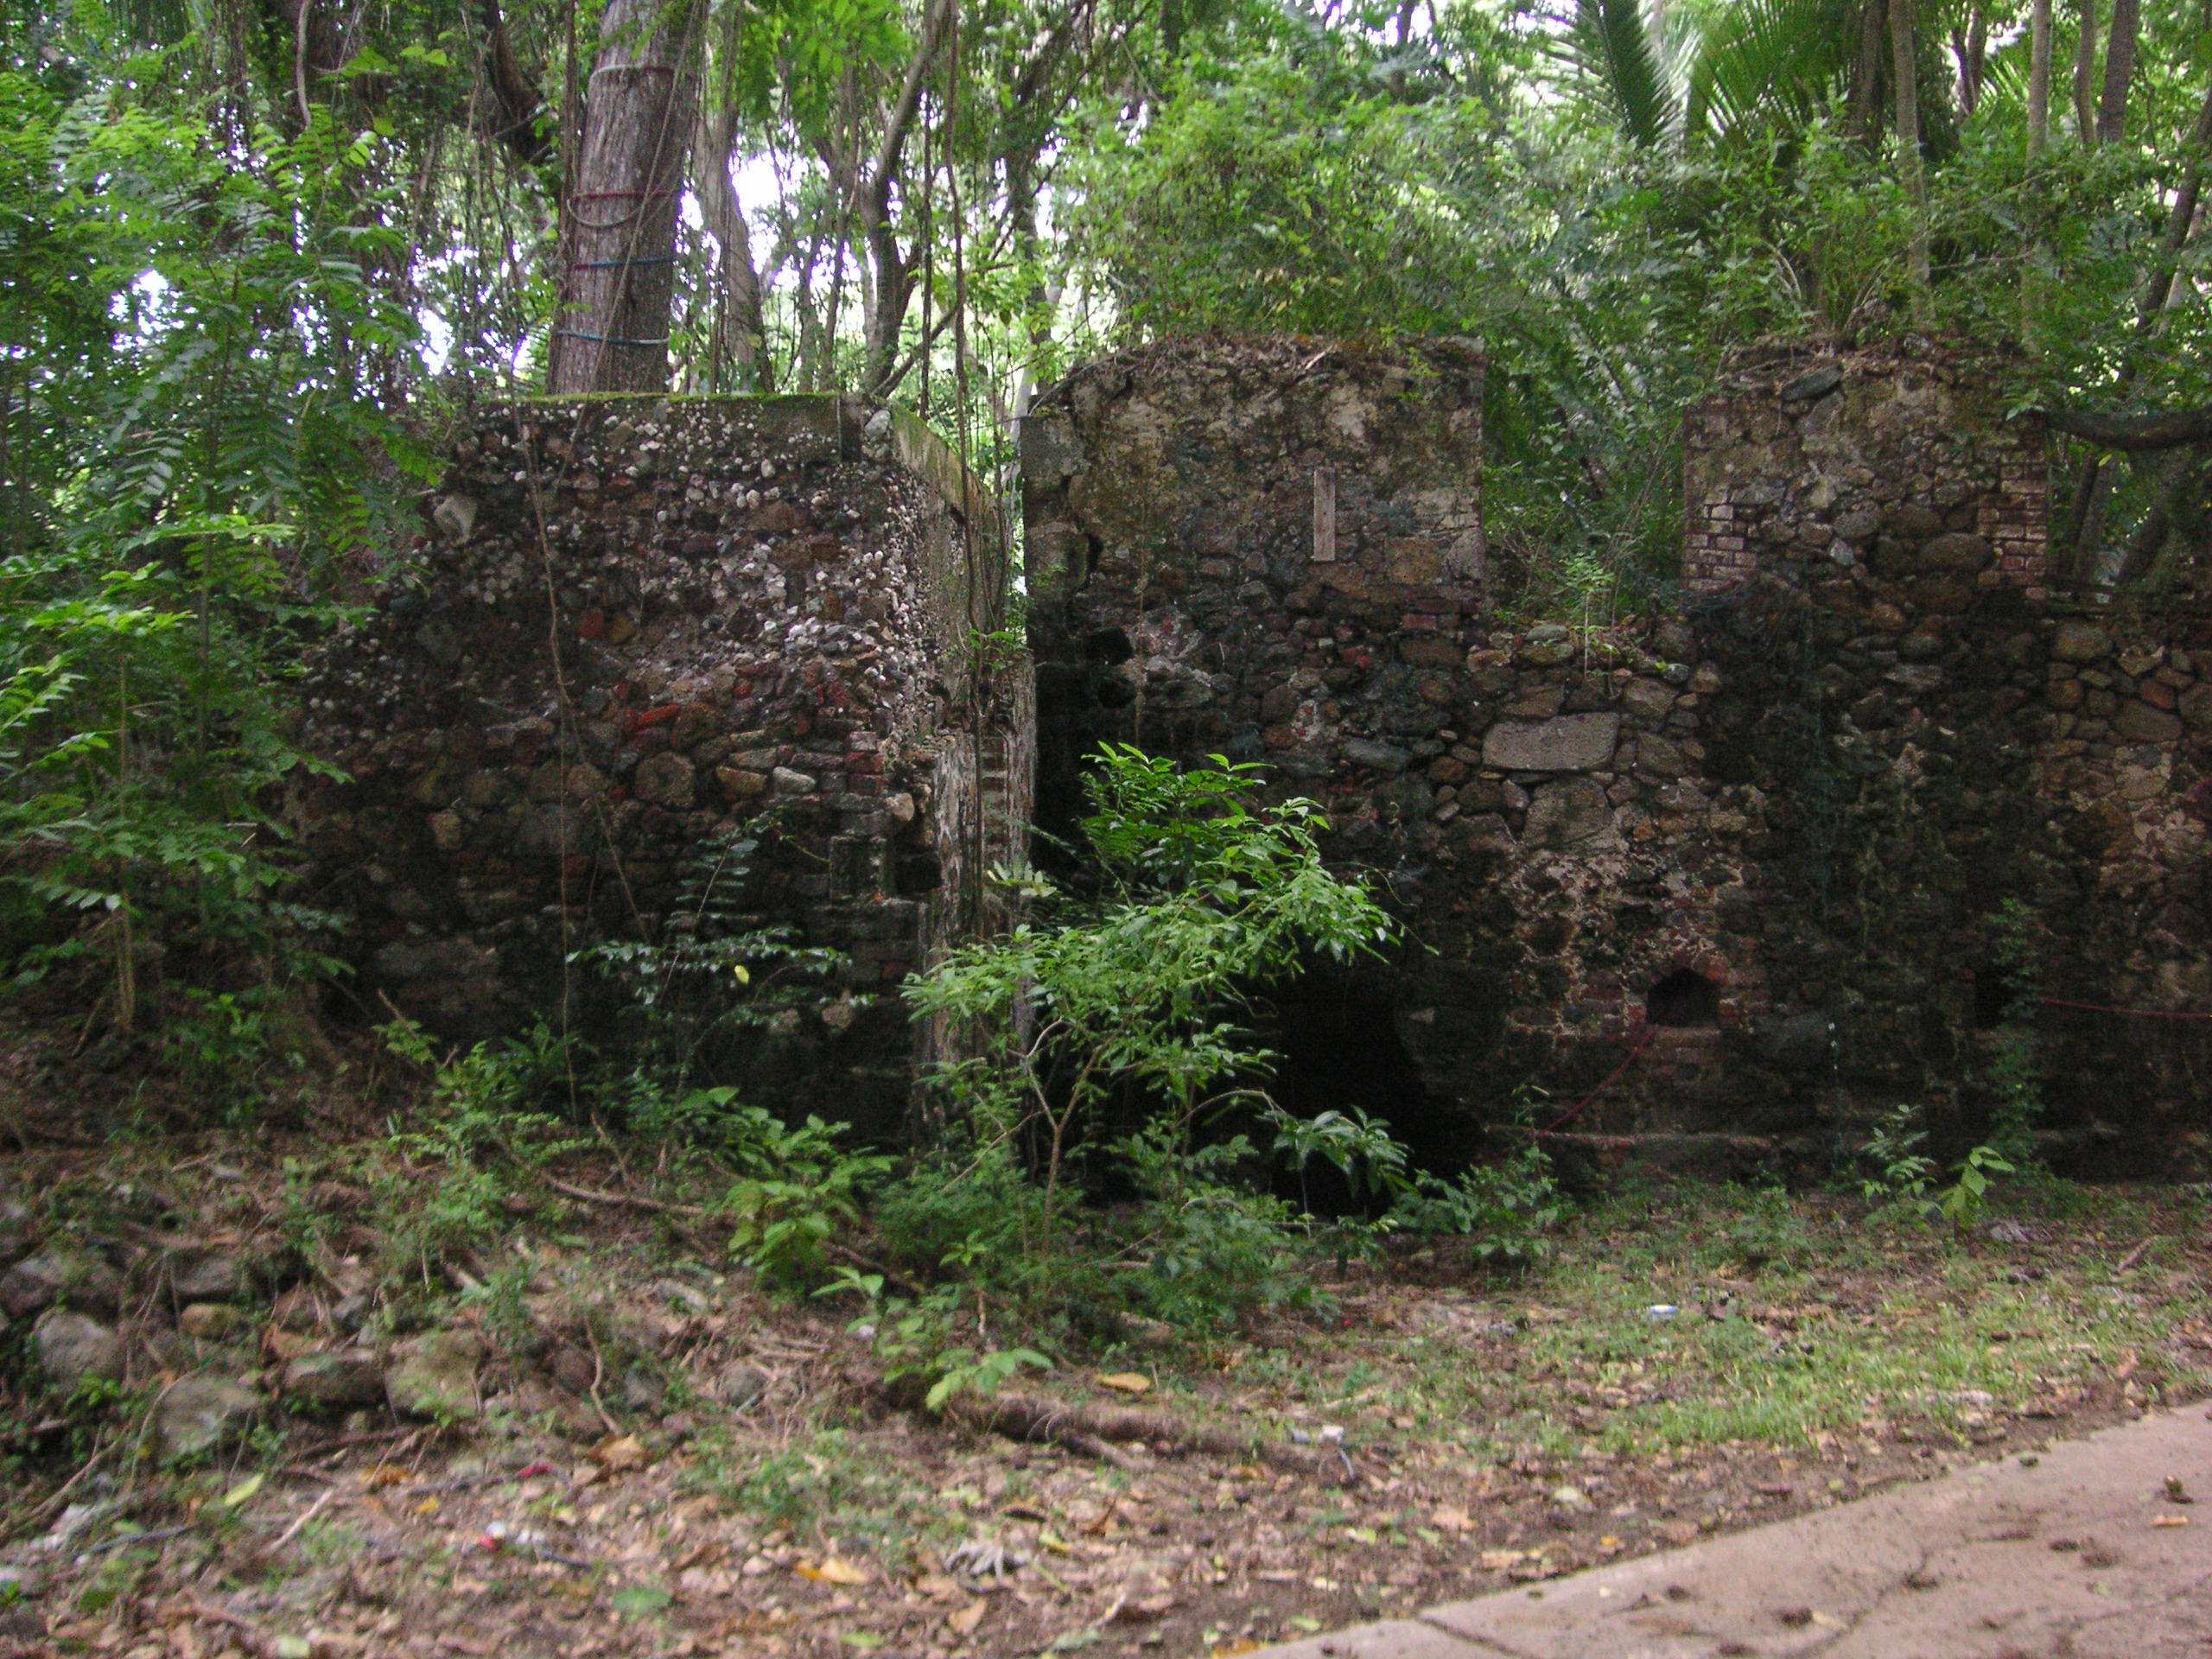 An abandoned and ruined sugar mill in Brewer's Bay, Tortola. Photo by Colin Riegels, August 20, 2006.